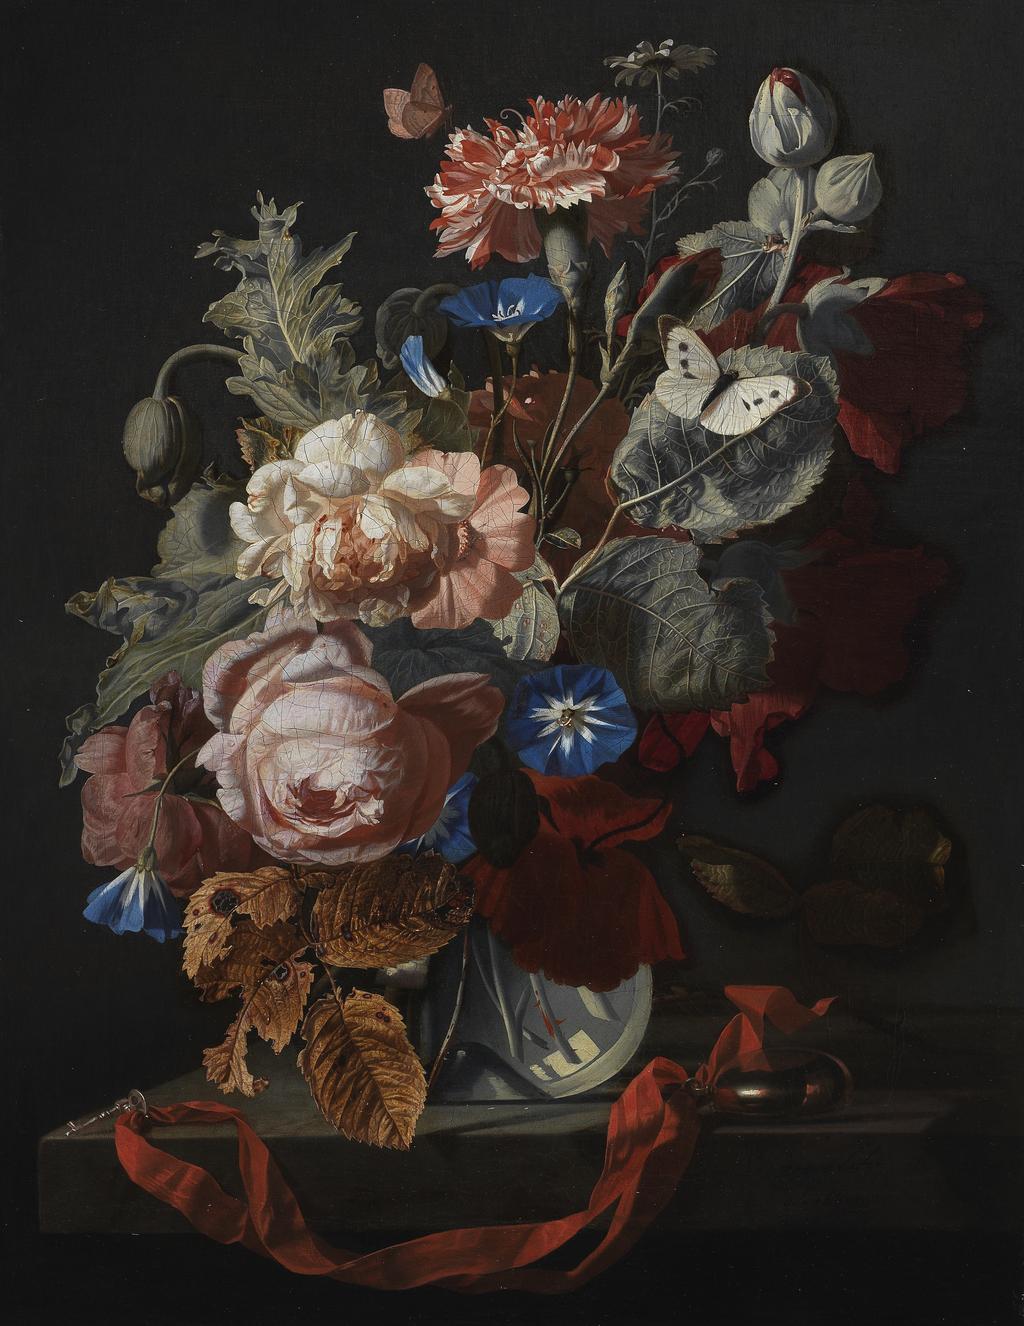 An image of A vase of flowers. Verelst, Simon Pietersz. (Dutch, 1644-1710(?)/21). Oil on canvas, height 51 cm, width 40.5 cm, 1669. Acquisition: bequeathed 1975; Fairhaven, Henry Rogers Broughton.